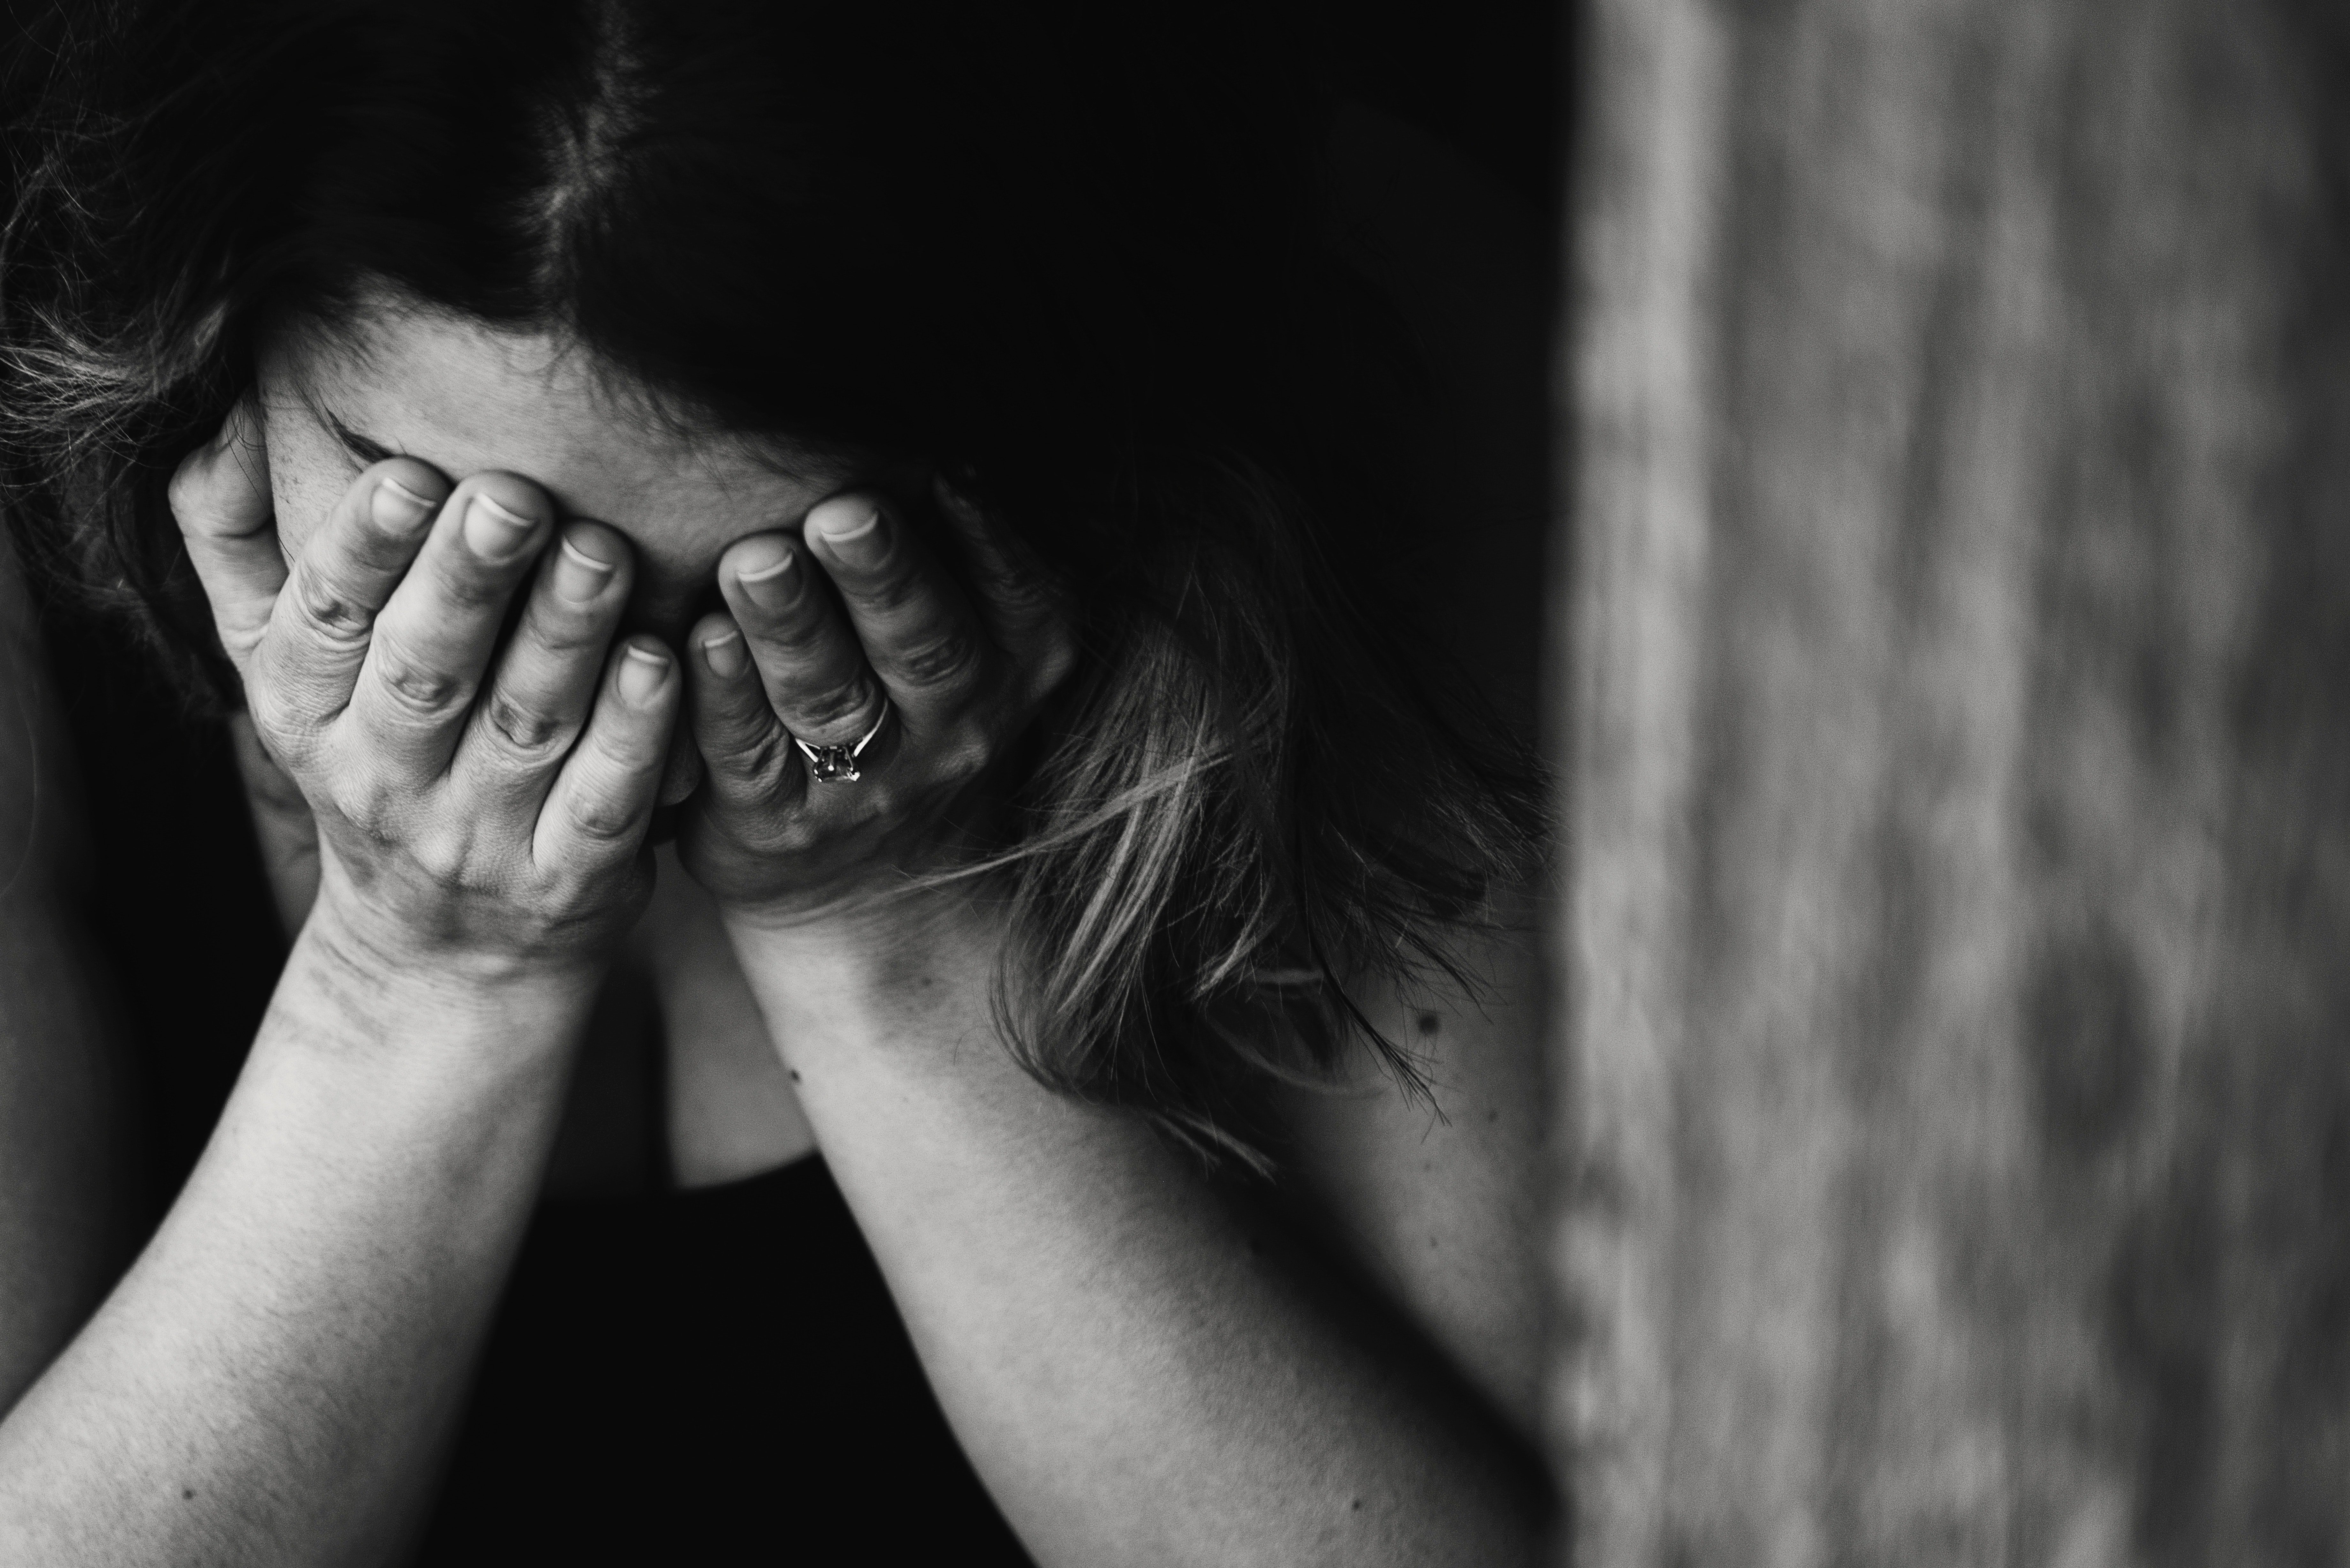 Margaret was brought to tears after she learned of her sickness. | Photo: Pexels